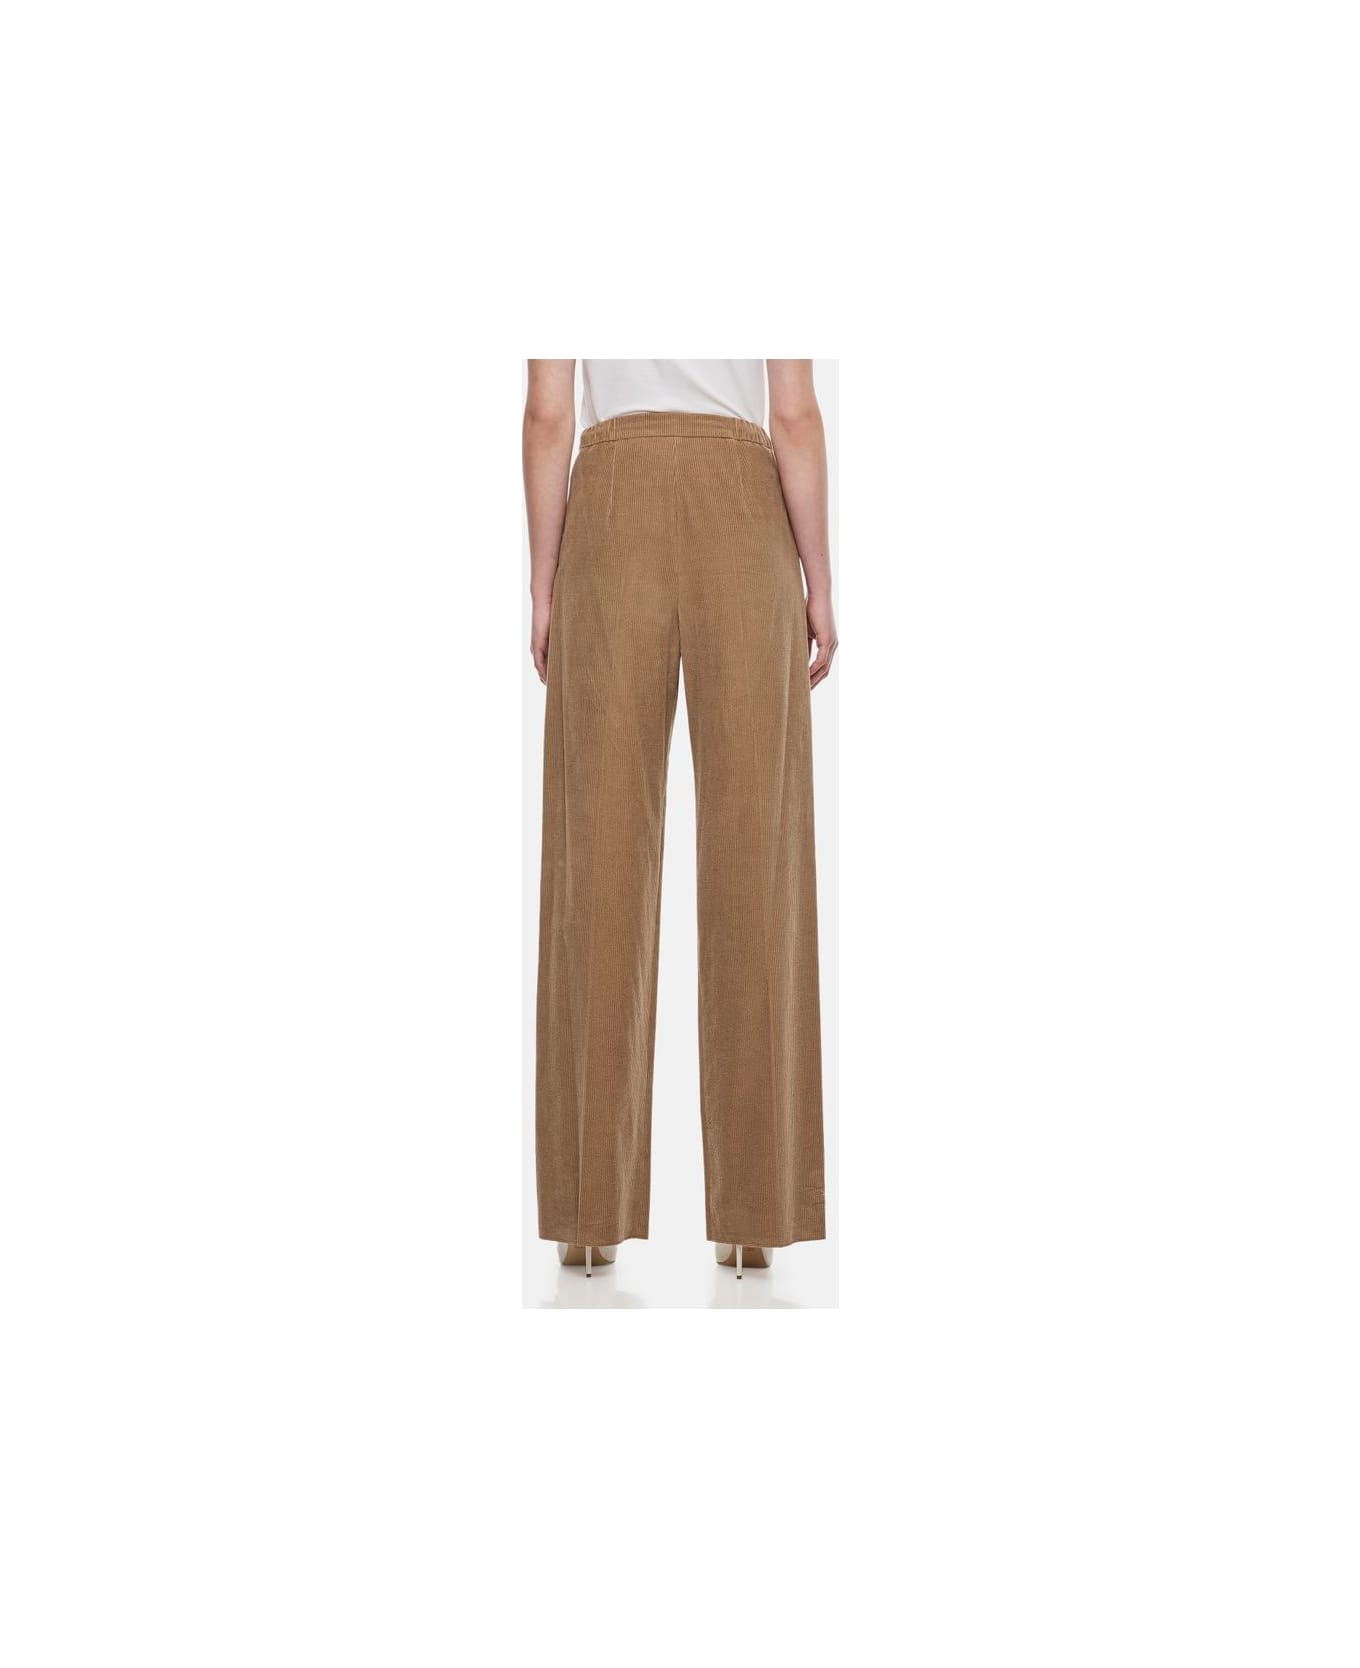 Max Mara Getto Velvet Trousers - Brown ボトムス